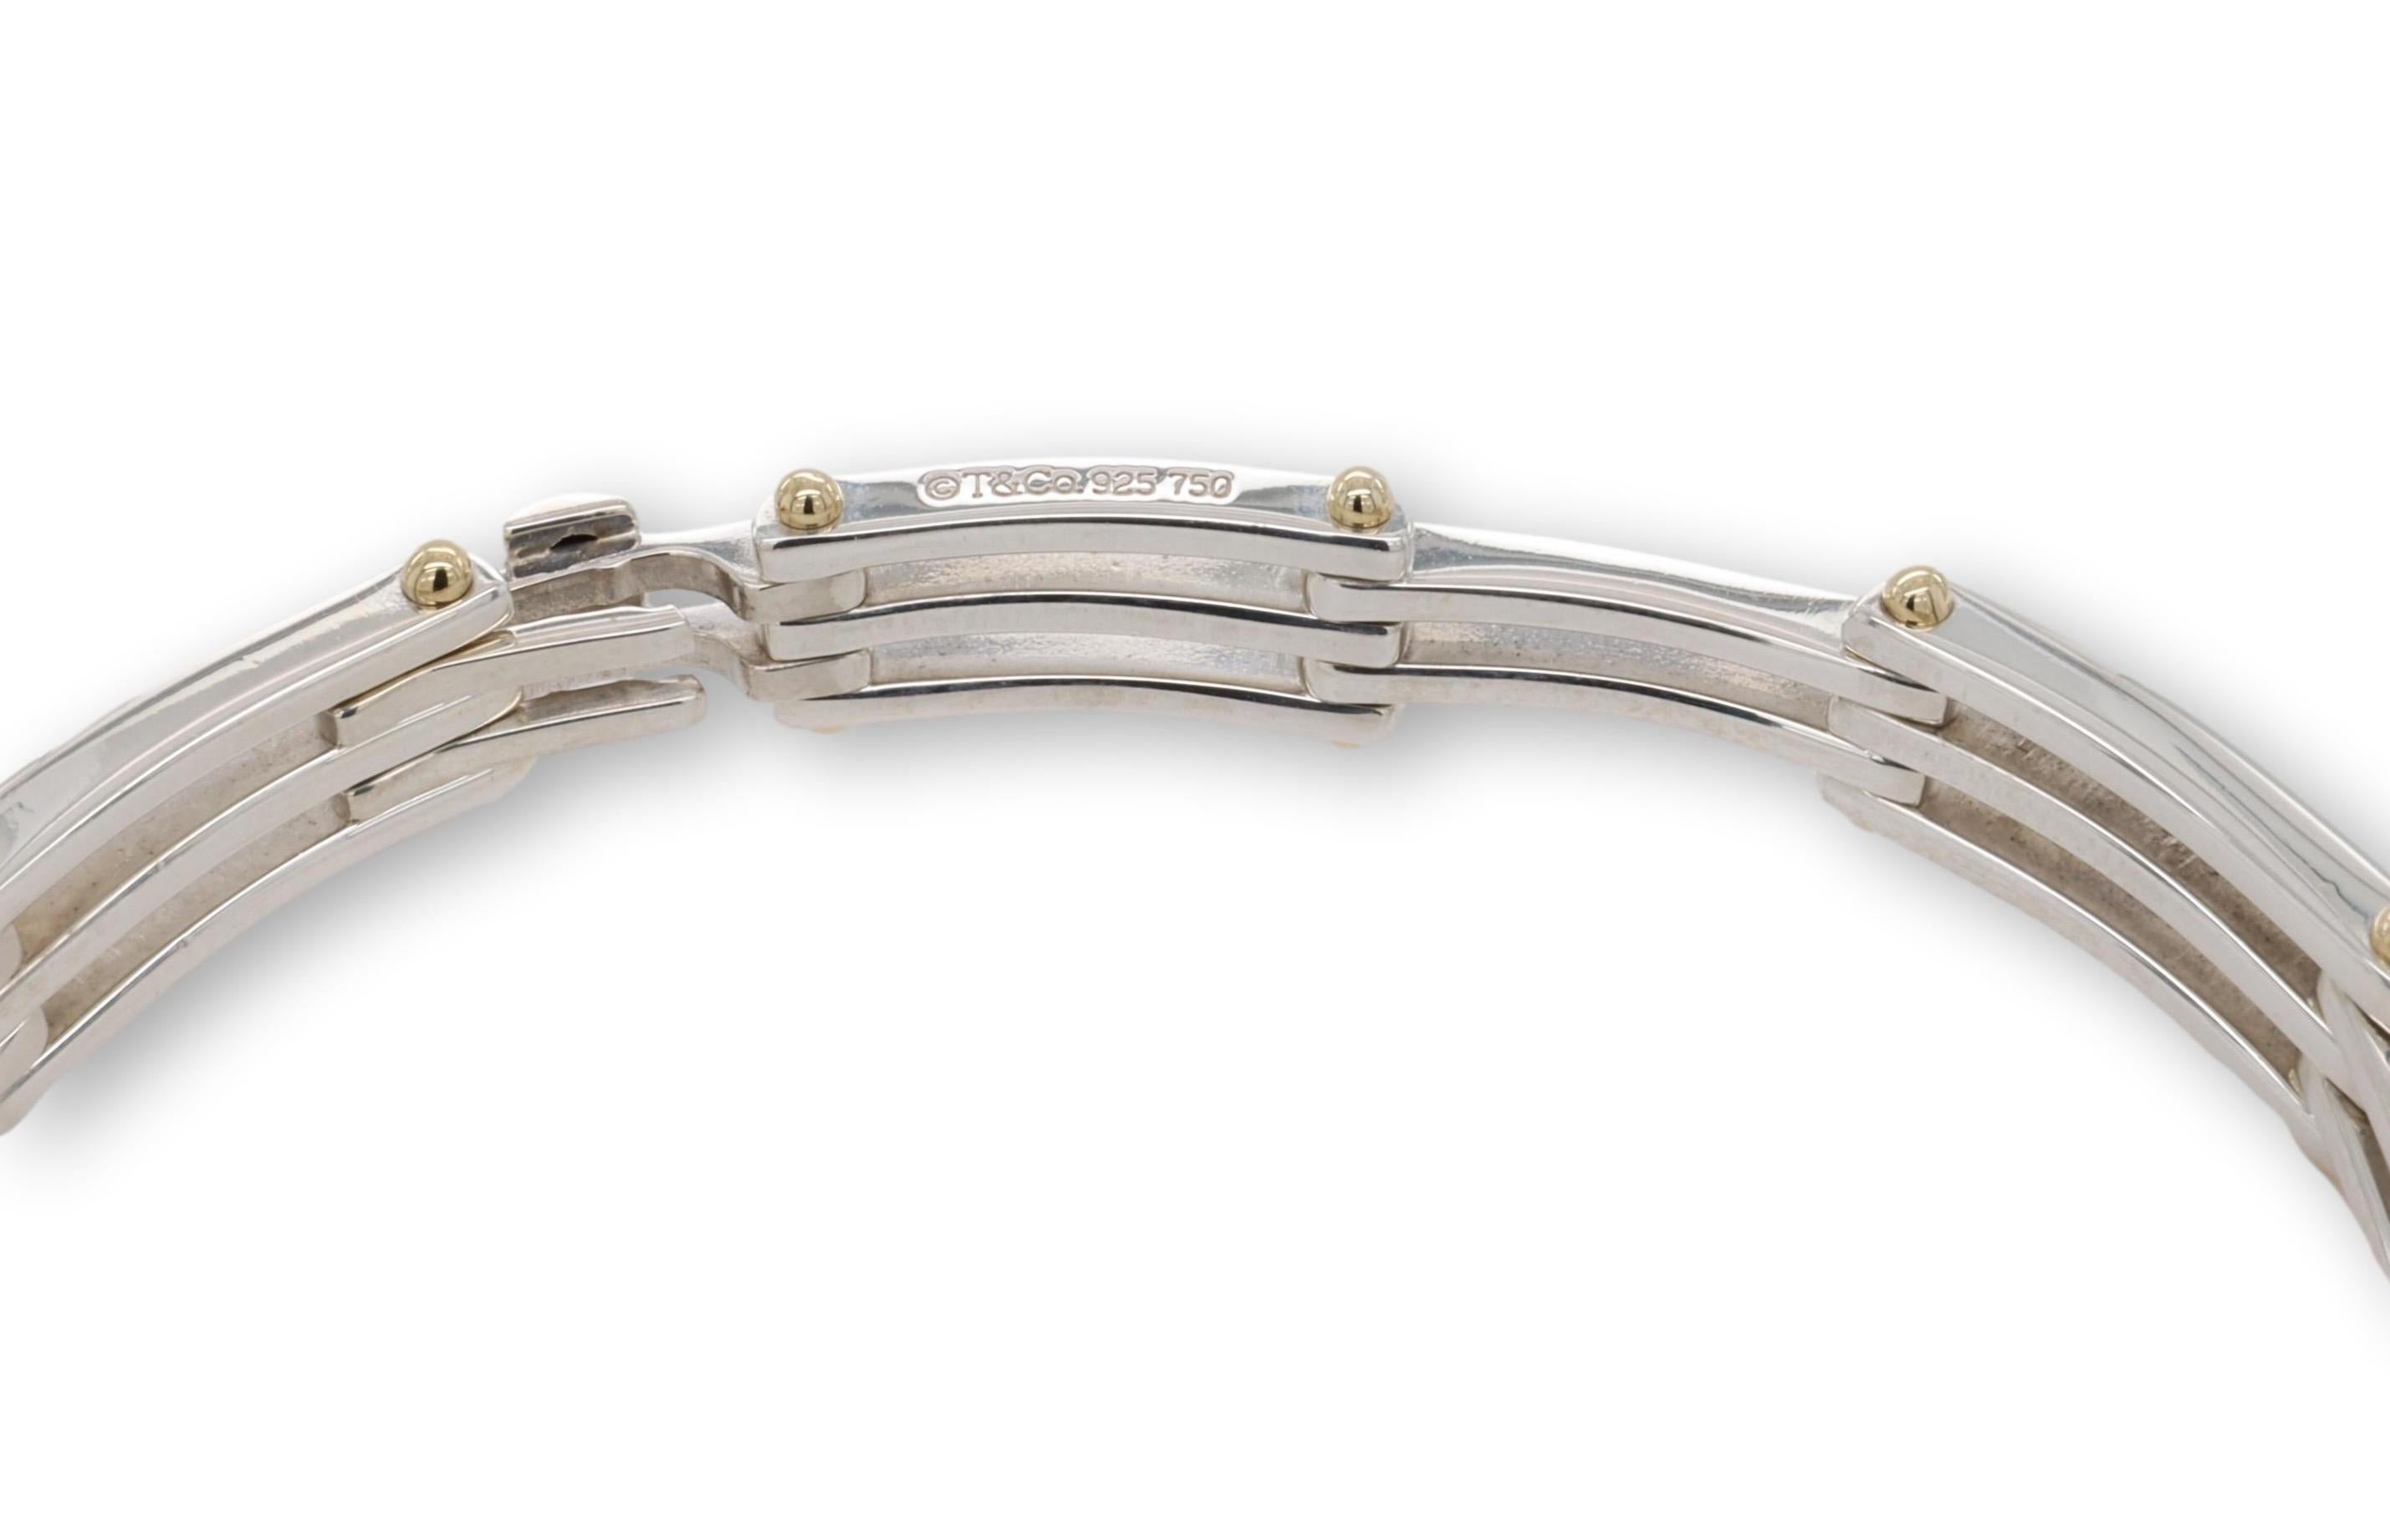 Vintage Tiffany & Co. men's bracelet in an open scroll Gate Link design finely crafted in sterling silver accented by 18K yellow gold beads throughout with a slide lock closure. Bracelet measures 11mm with beads and 8mm without. Fully hallmarked